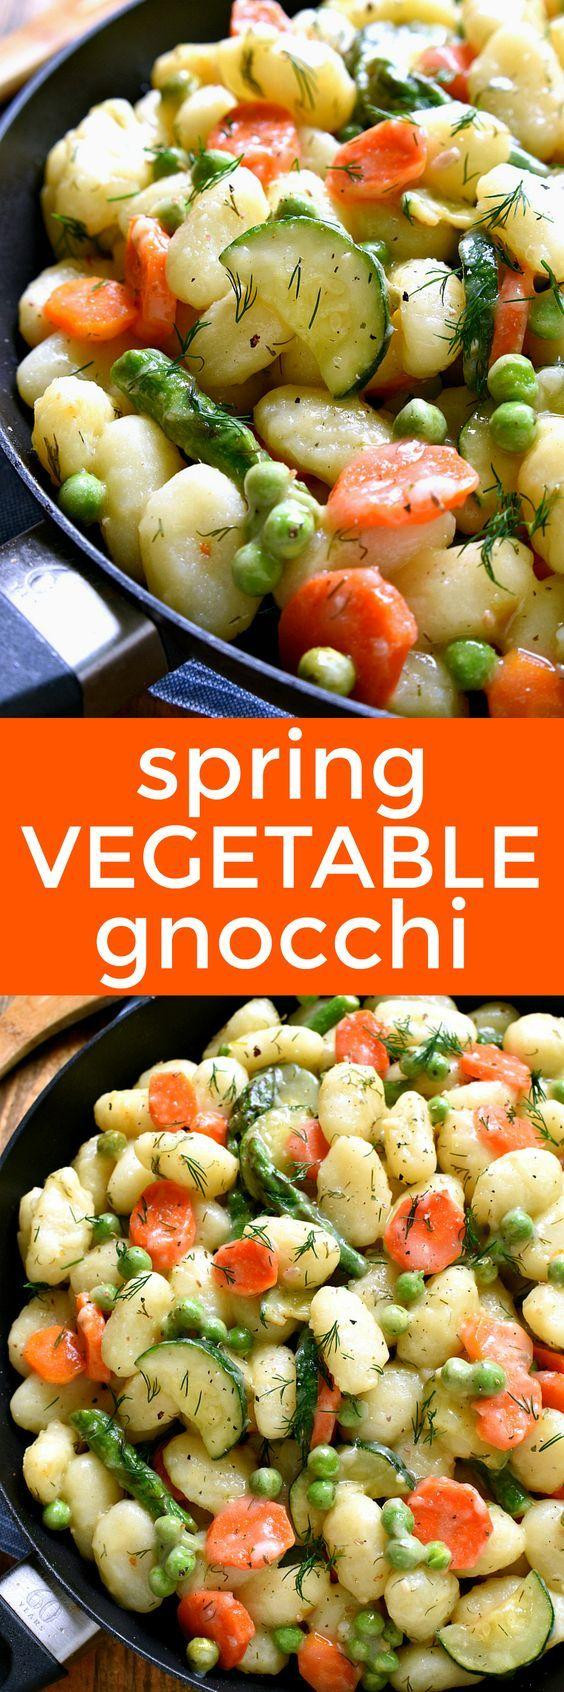 Vegetable Recipes For Kids
 Ve able Recipes For Kids Kid Friendly Ve able Recipes